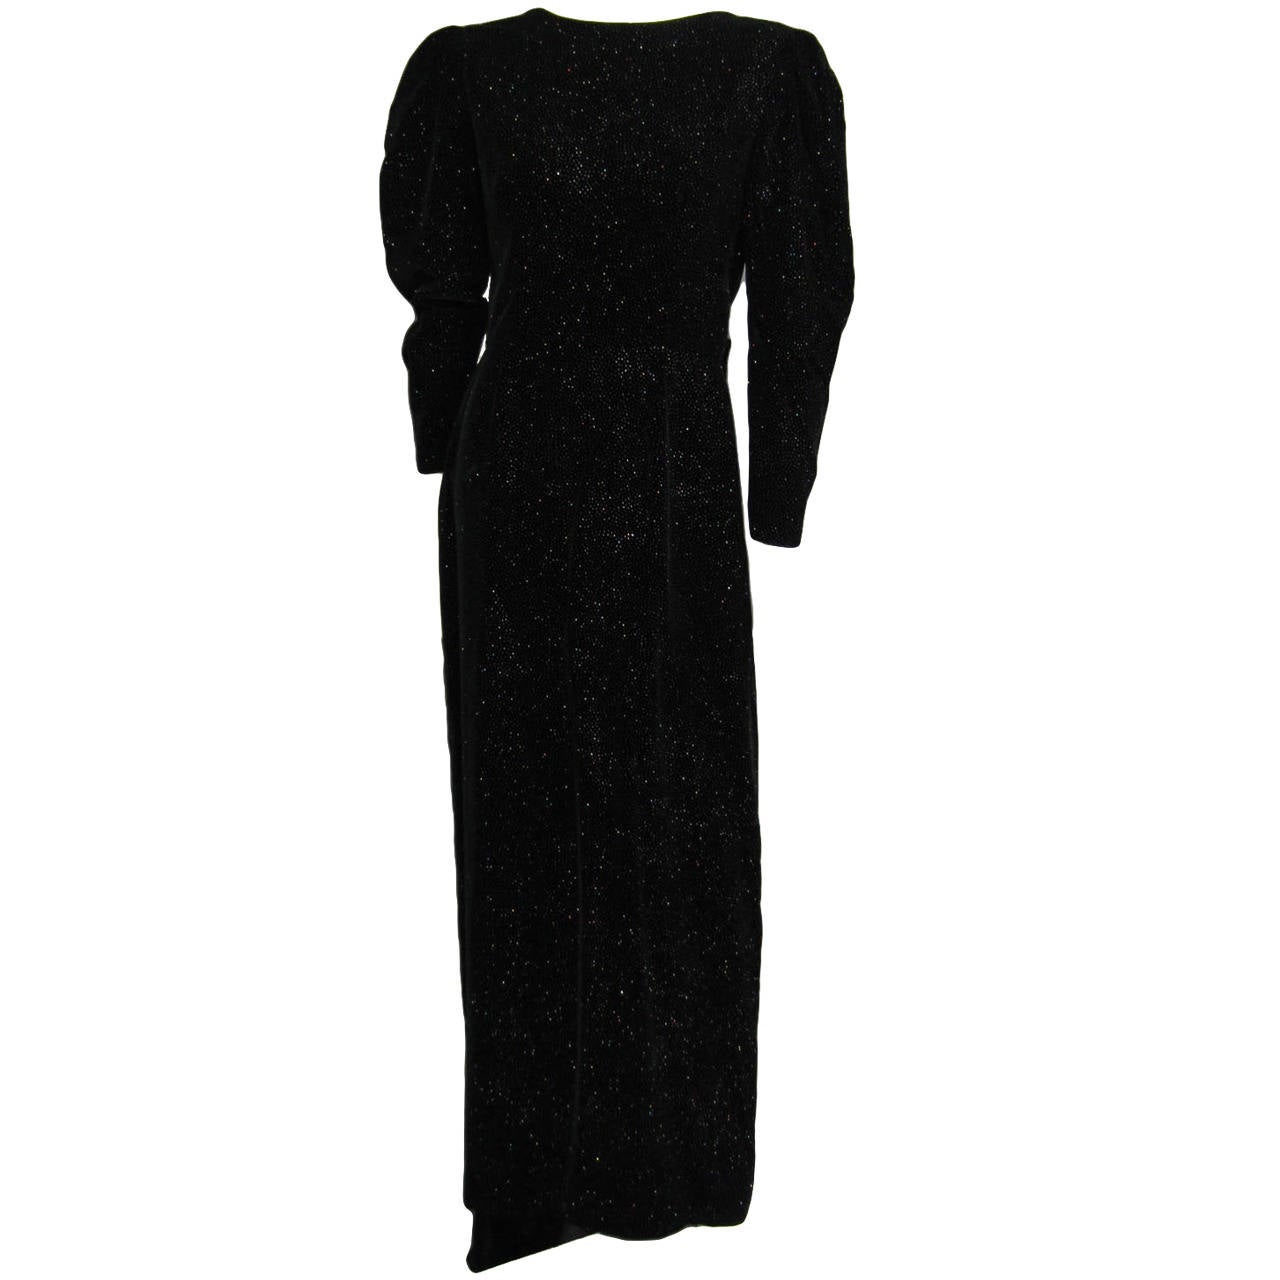 LANVIN Black Glitter Gown with Plunging Back and Bow Detail For Sale